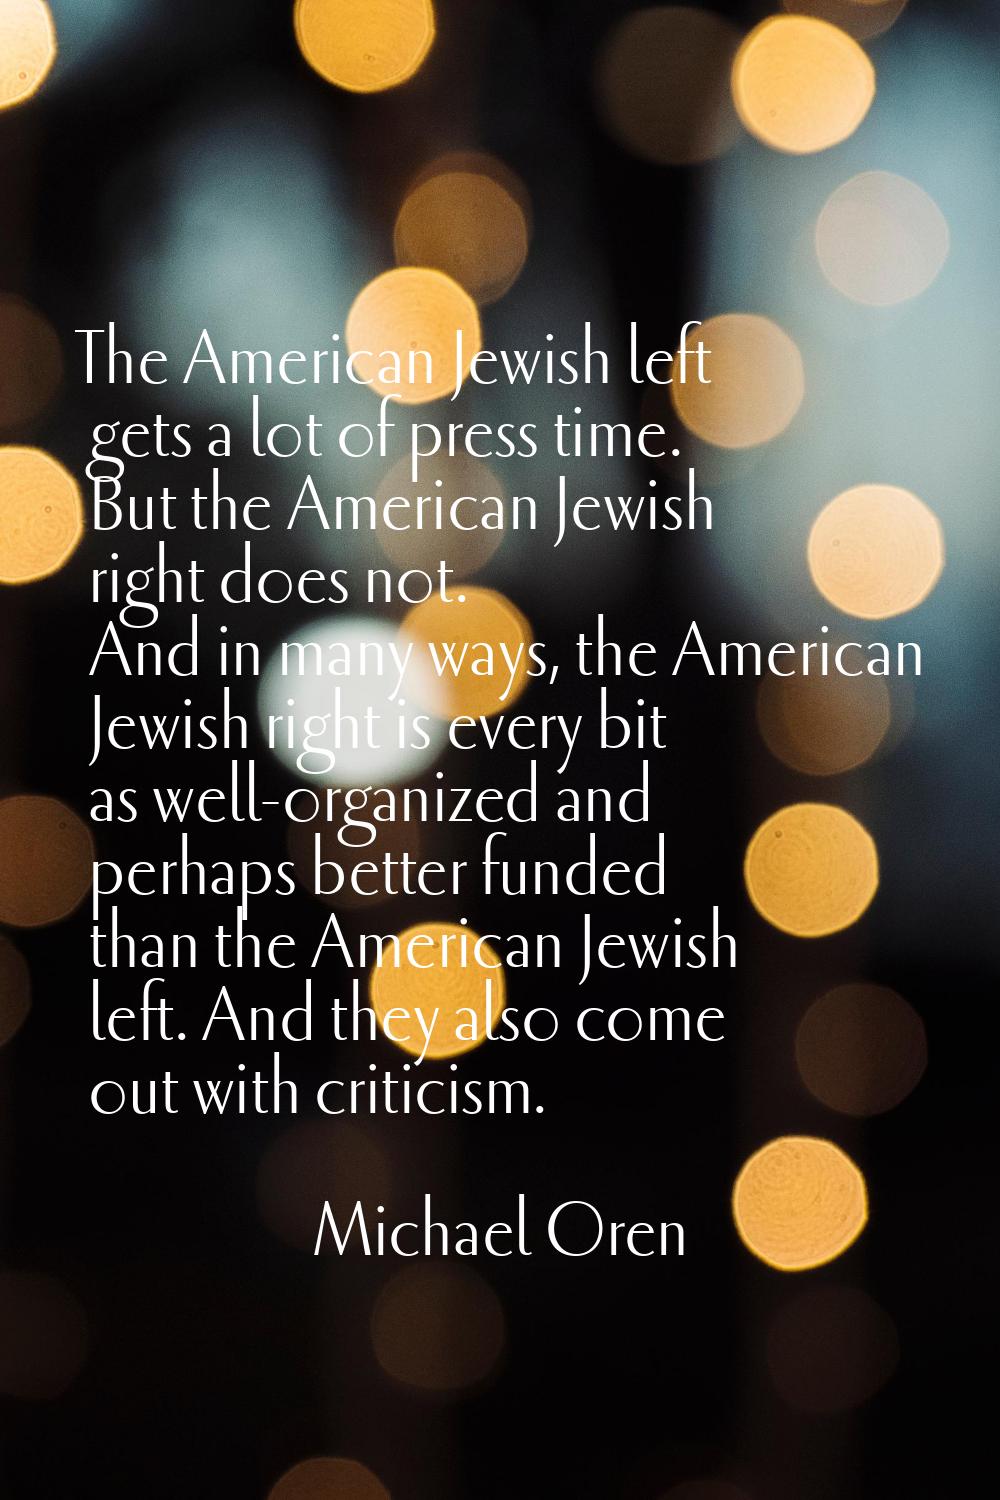 The American Jewish left gets a lot of press time. But the American Jewish right does not. And in m